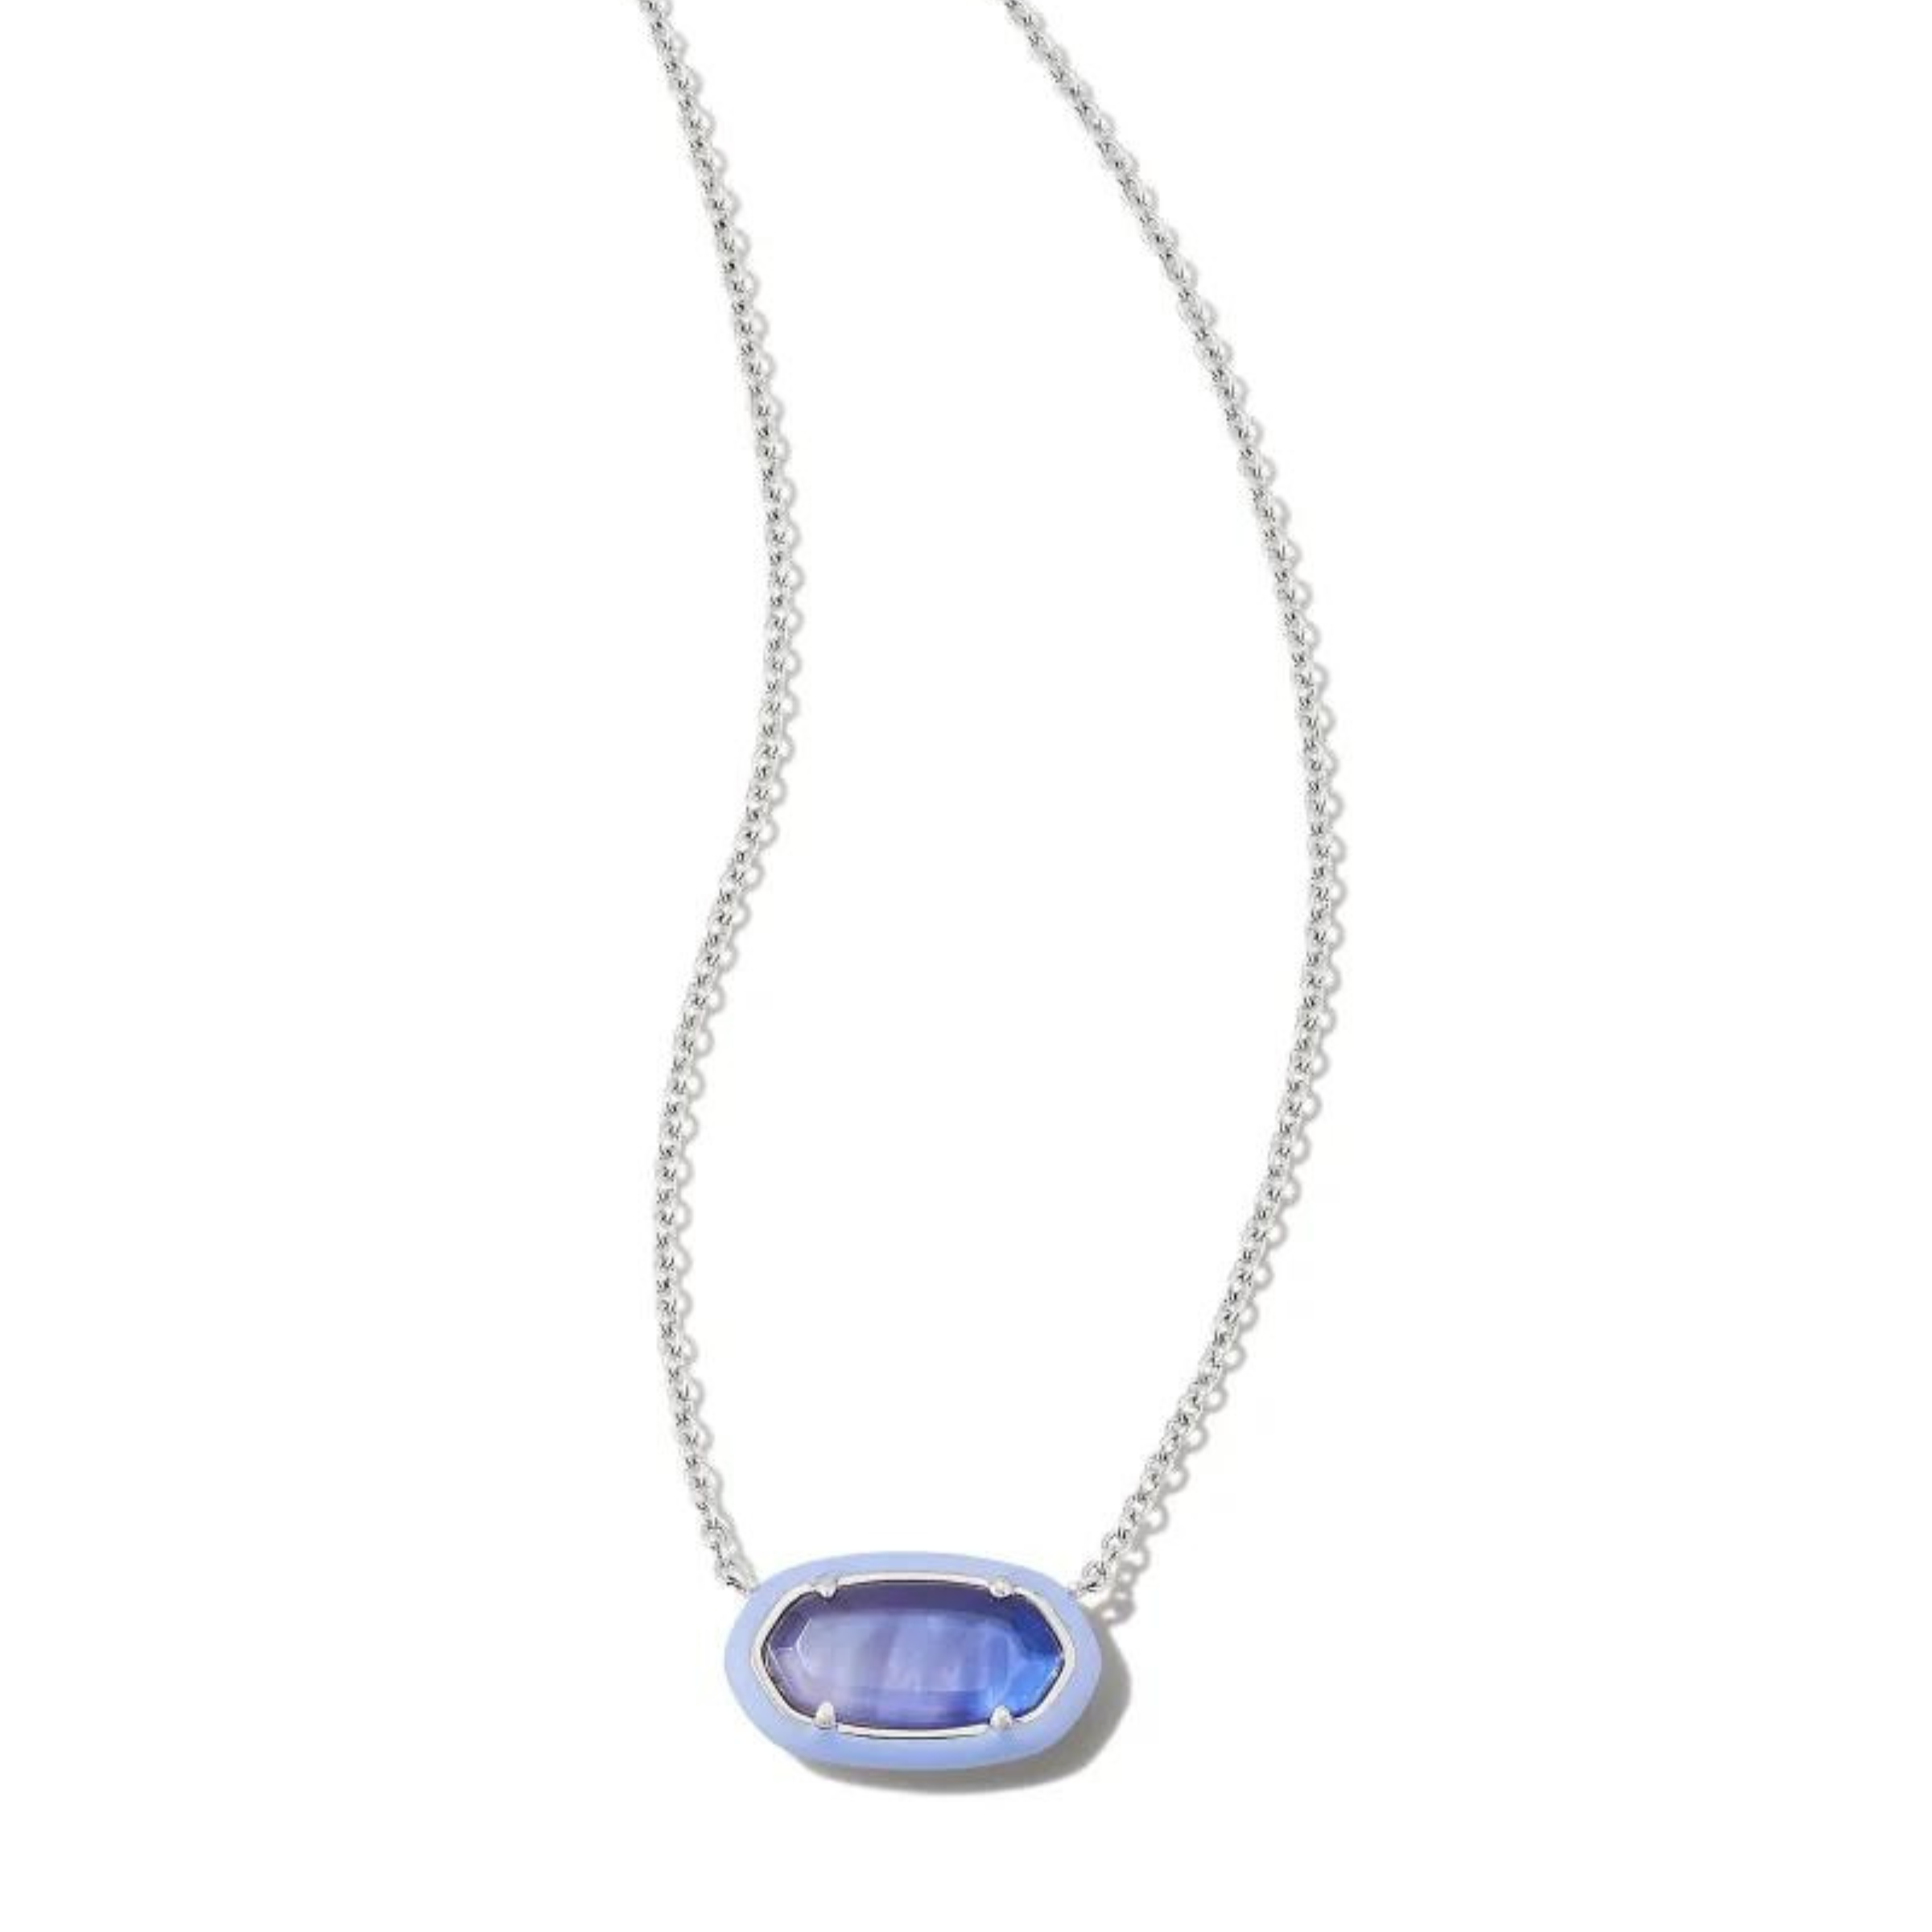 Pictured on a white background is a silver chain necklace with an oval pendant. This pendant is lavender and silver.  